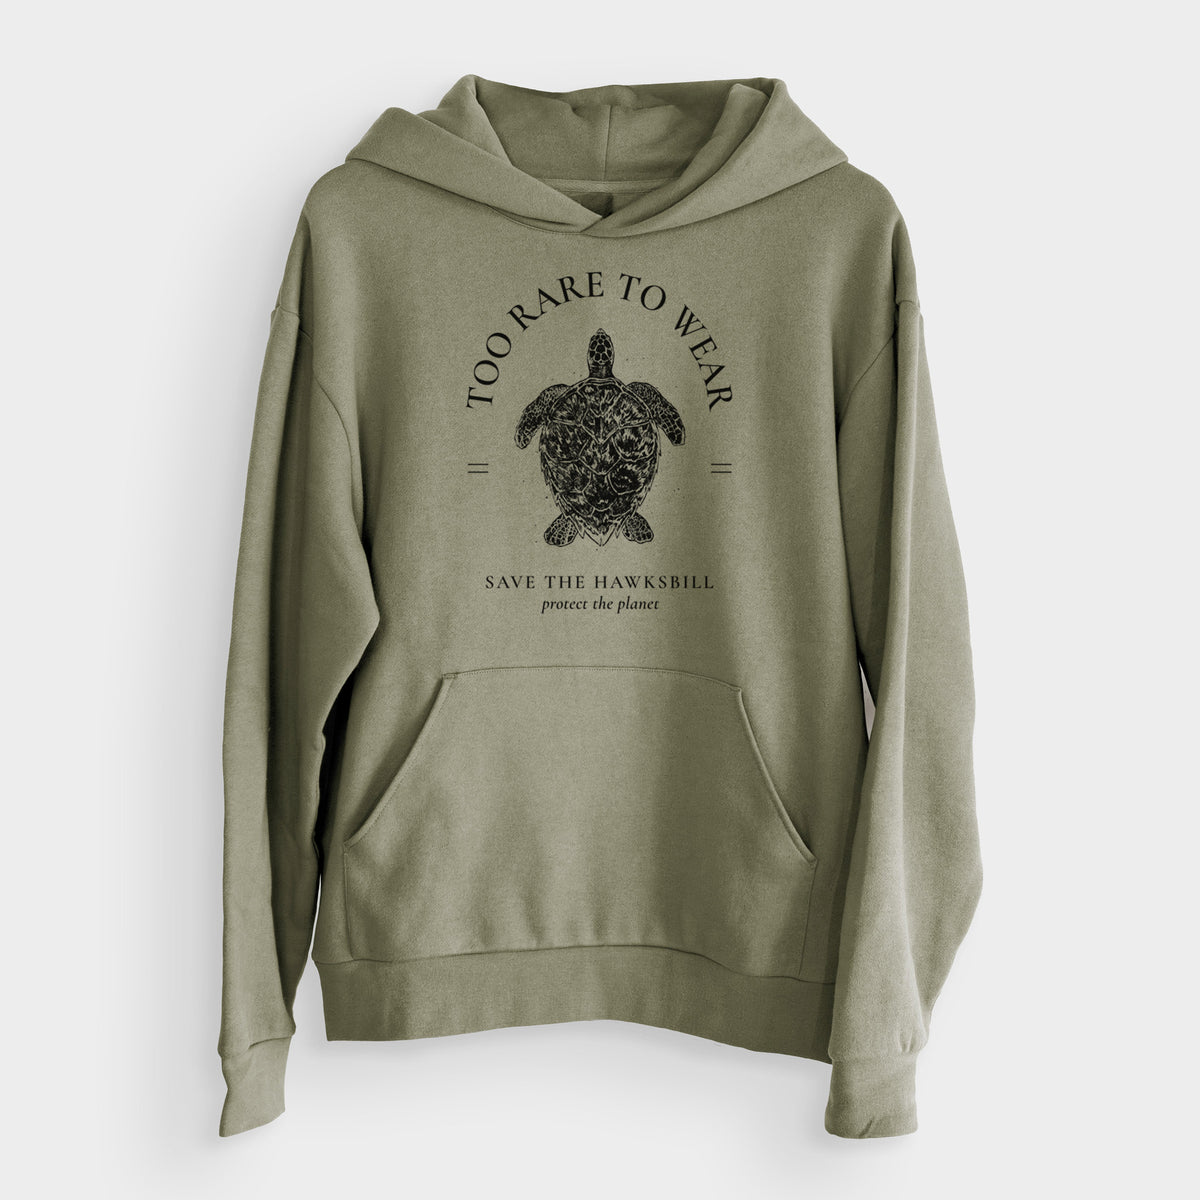 Too Rare to Wear - Save the Hawksbill  - Bodega Midweight Hoodie